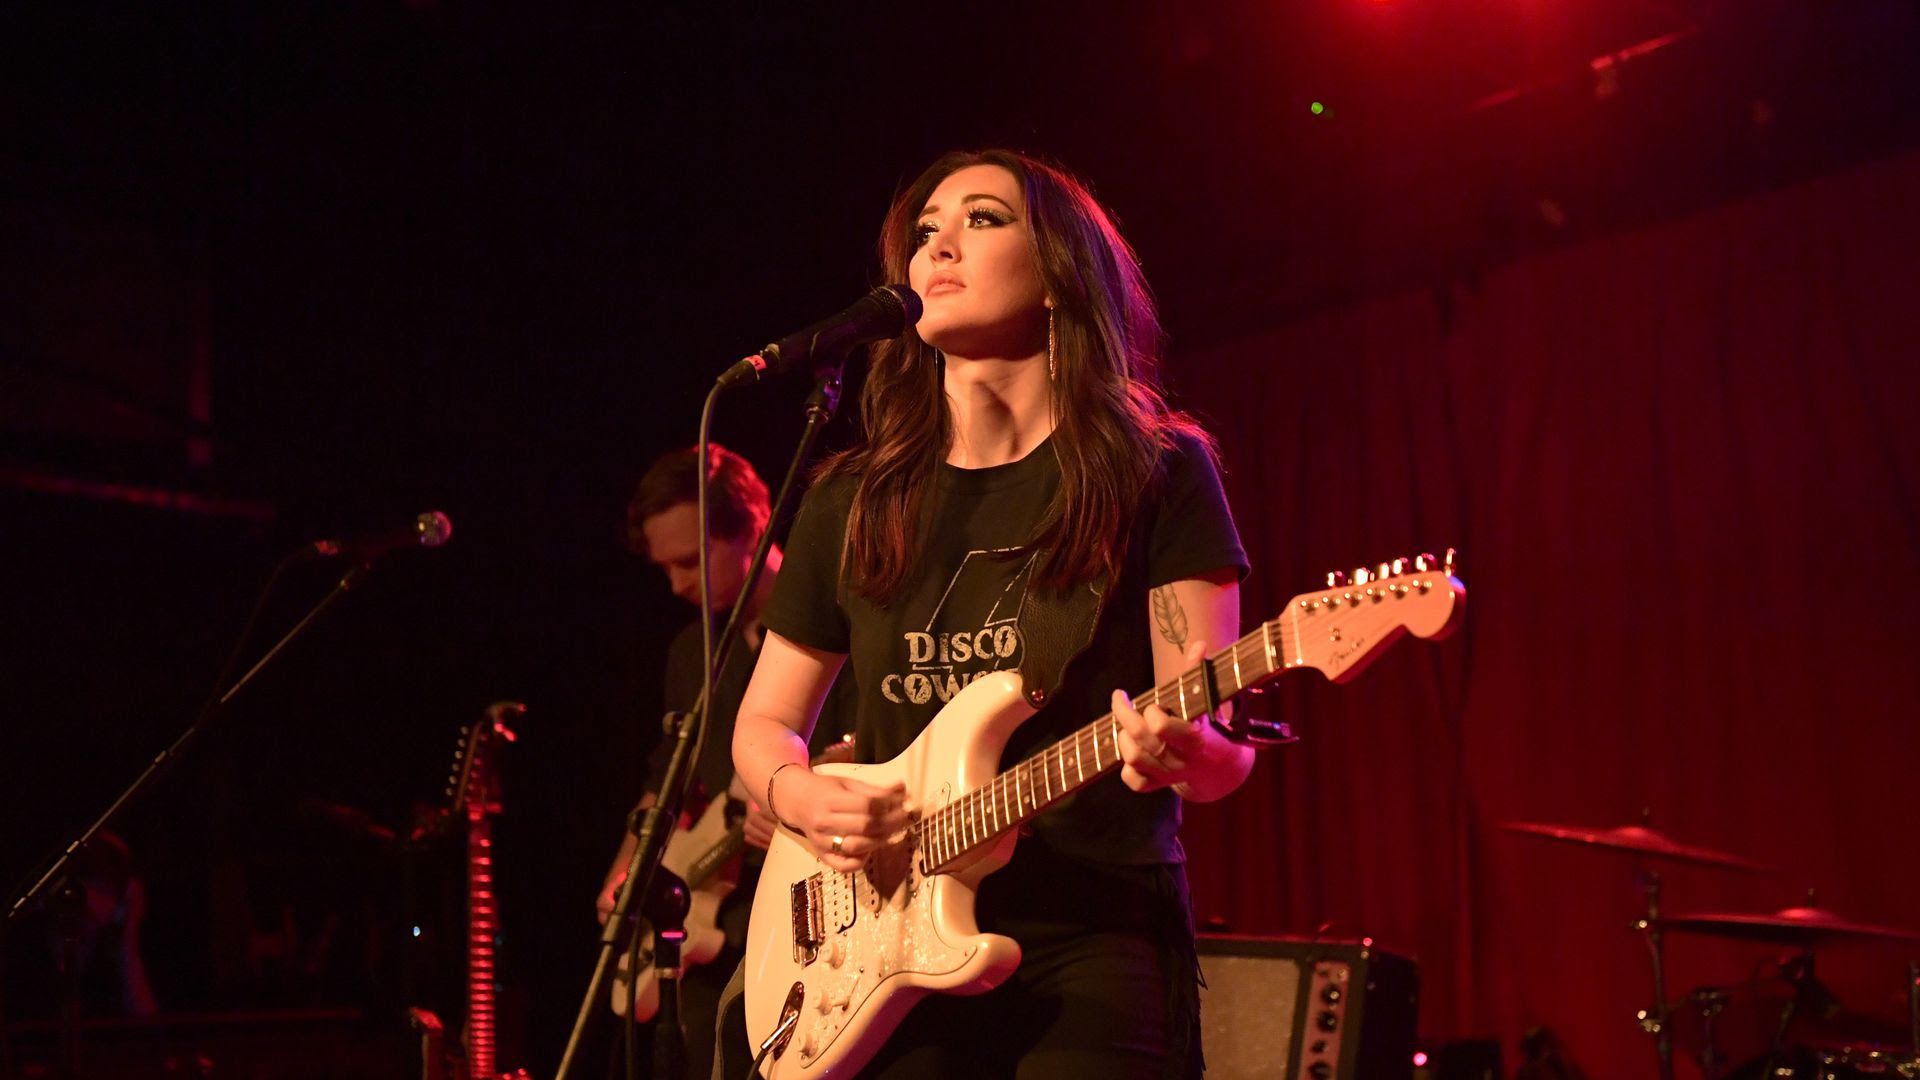 Singer-songwriter Aubrie Sellers on stage at Mercy Lounge